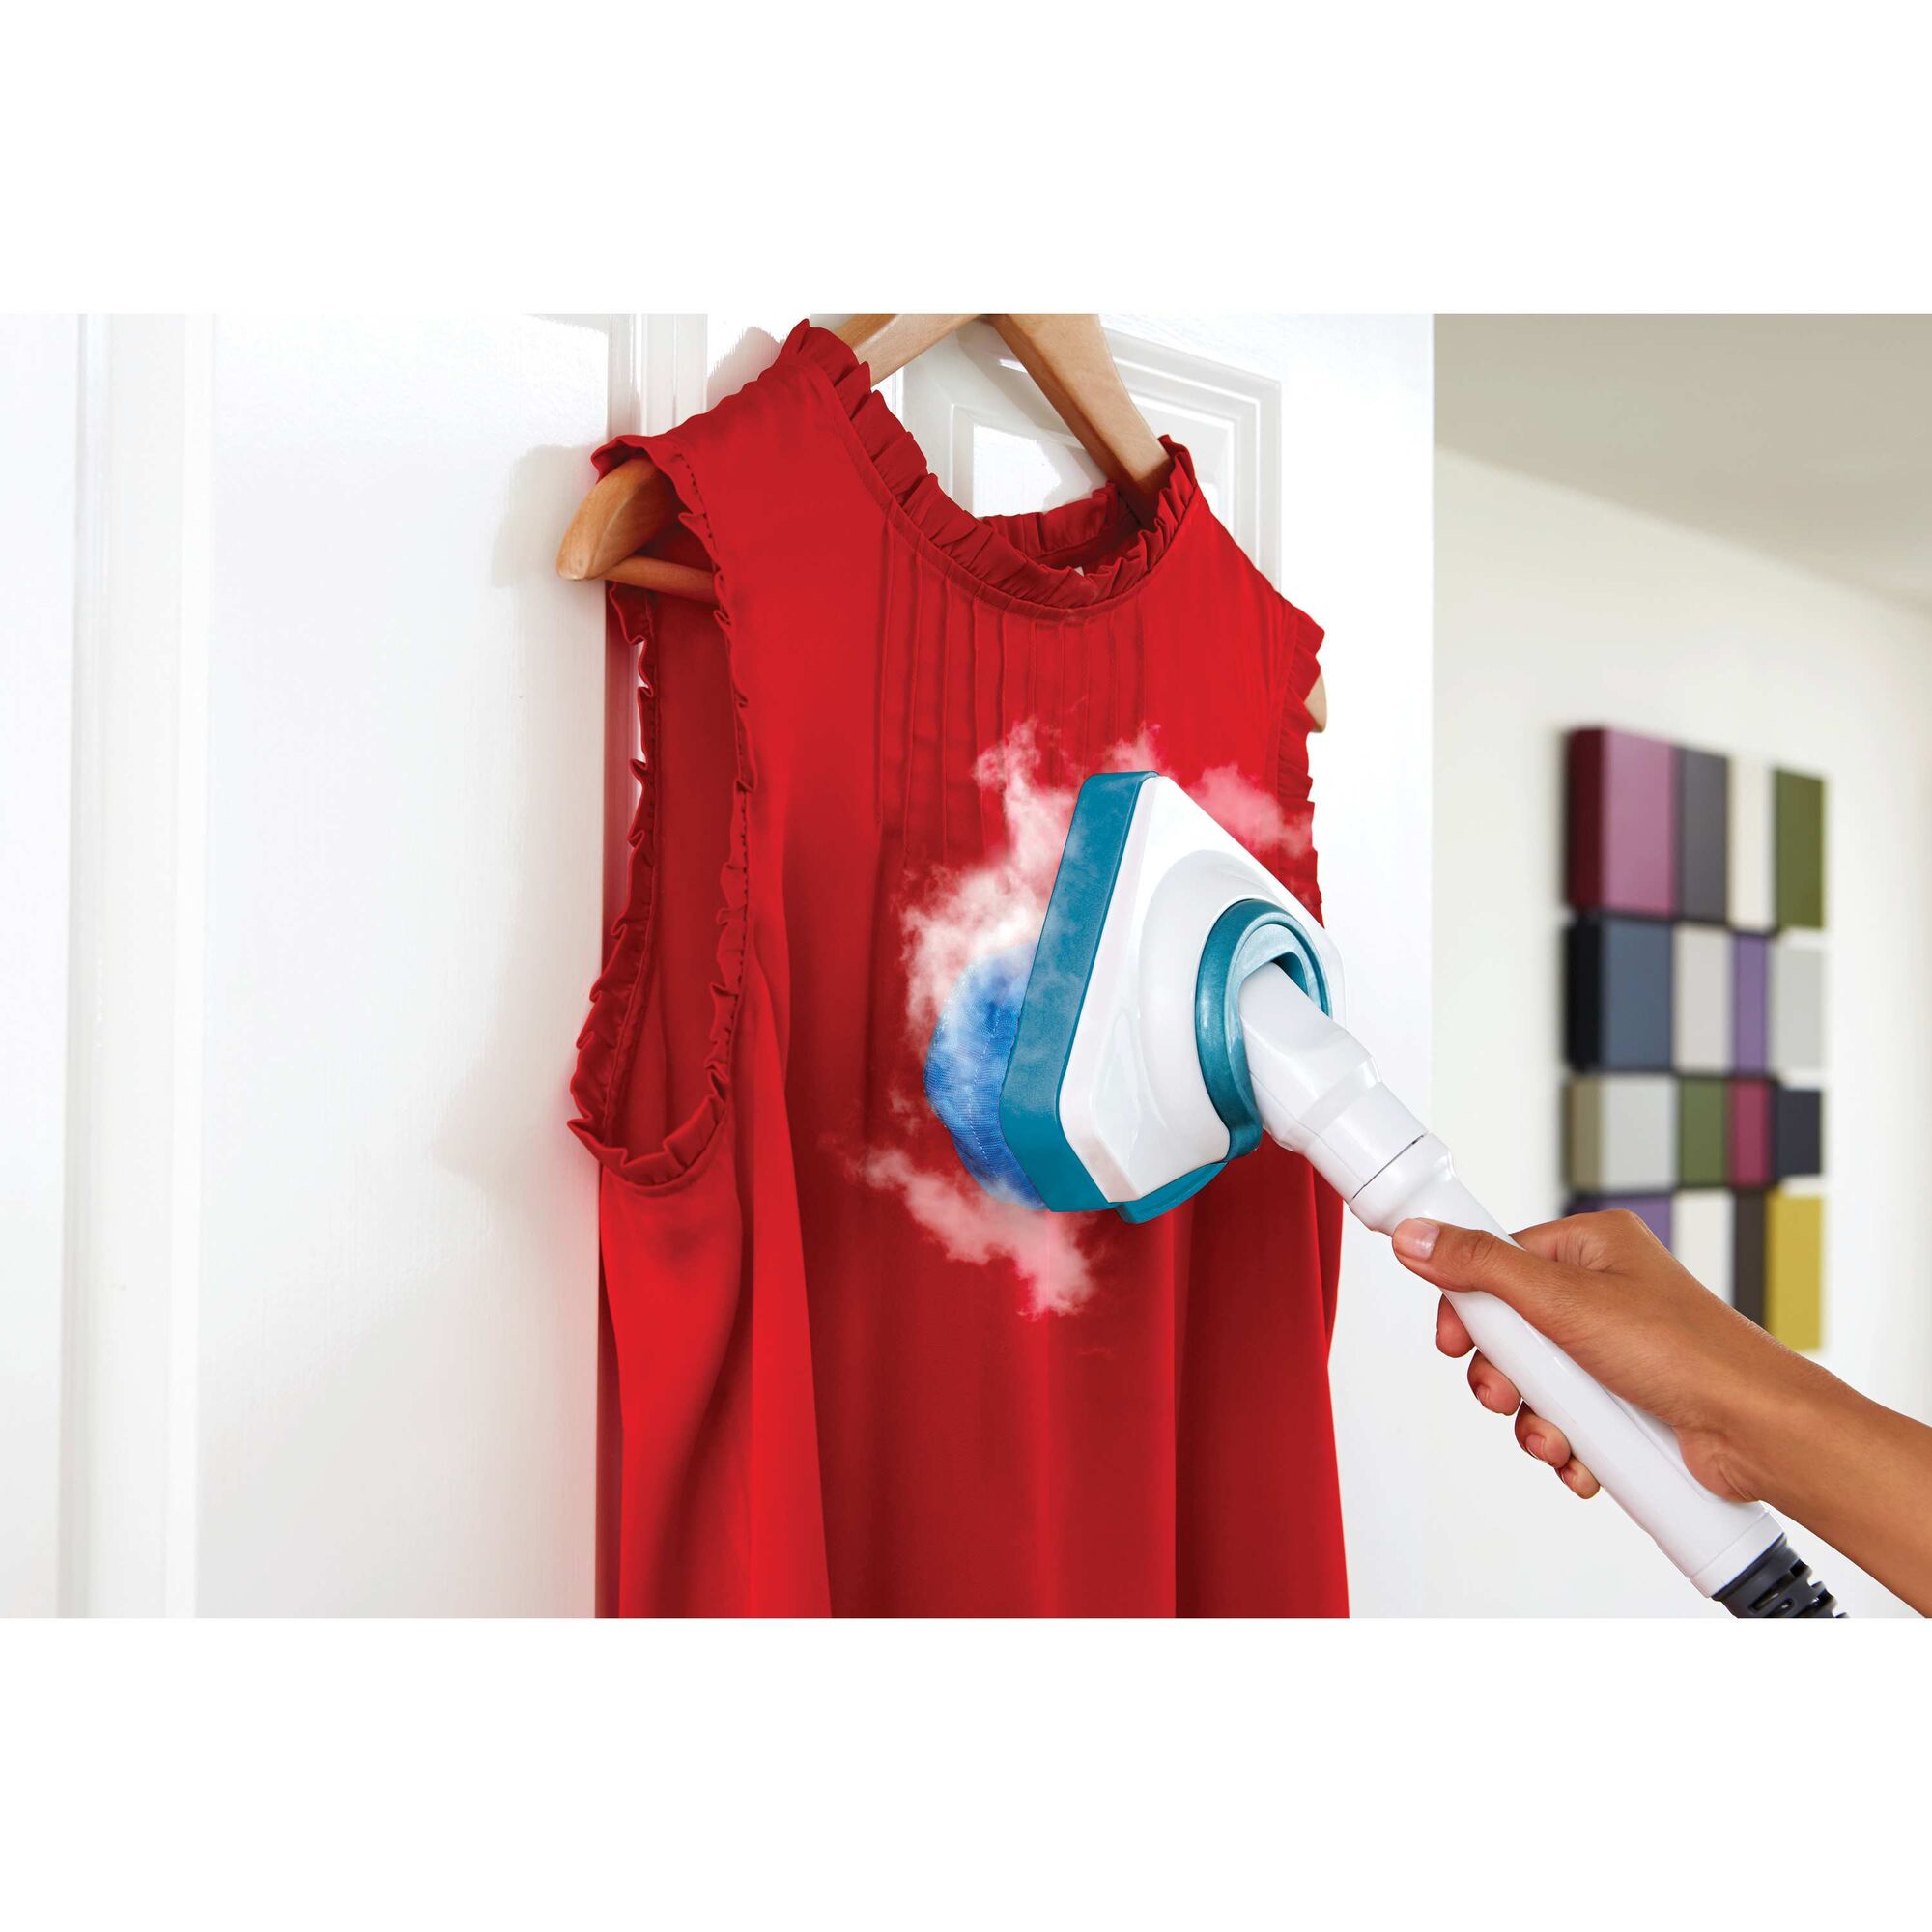 Garment attachment on the steam mop used on a red dress